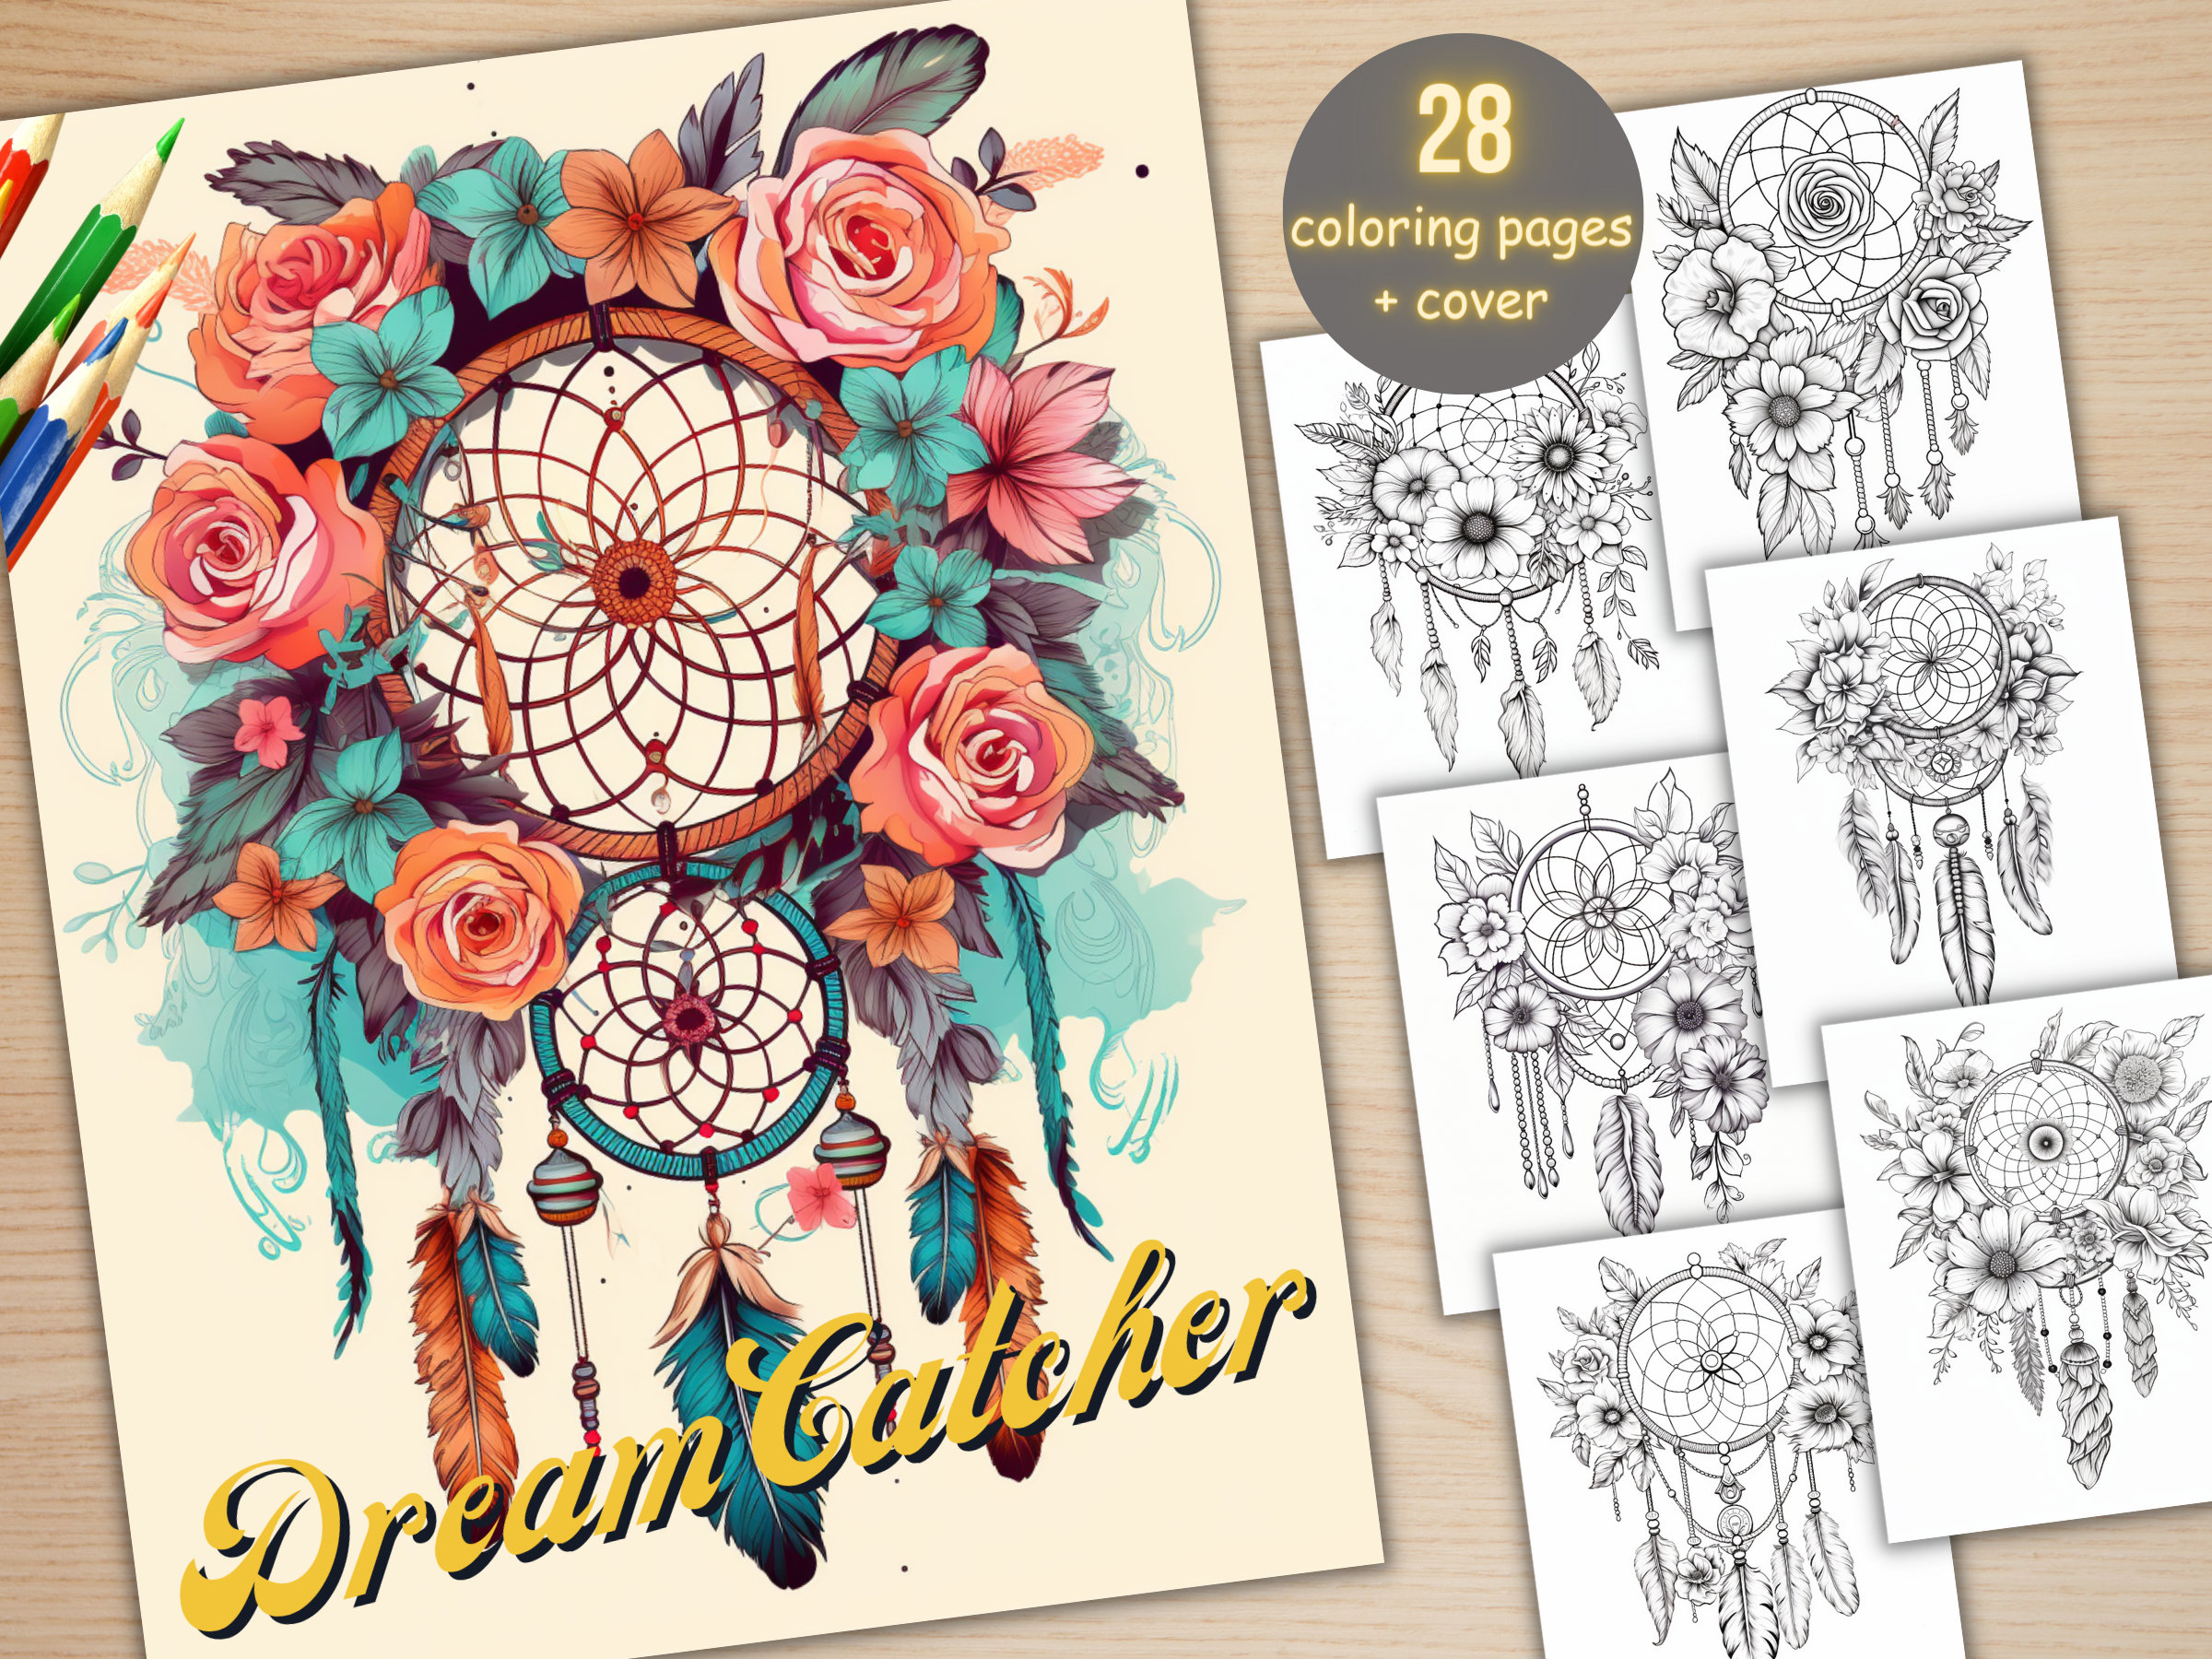 Dream Catcher Coloring Book for Adults: Unique hand Drawings - Anxiety,  Stress, Meditation, Happiness, and Relaxation - - Creative colorful art